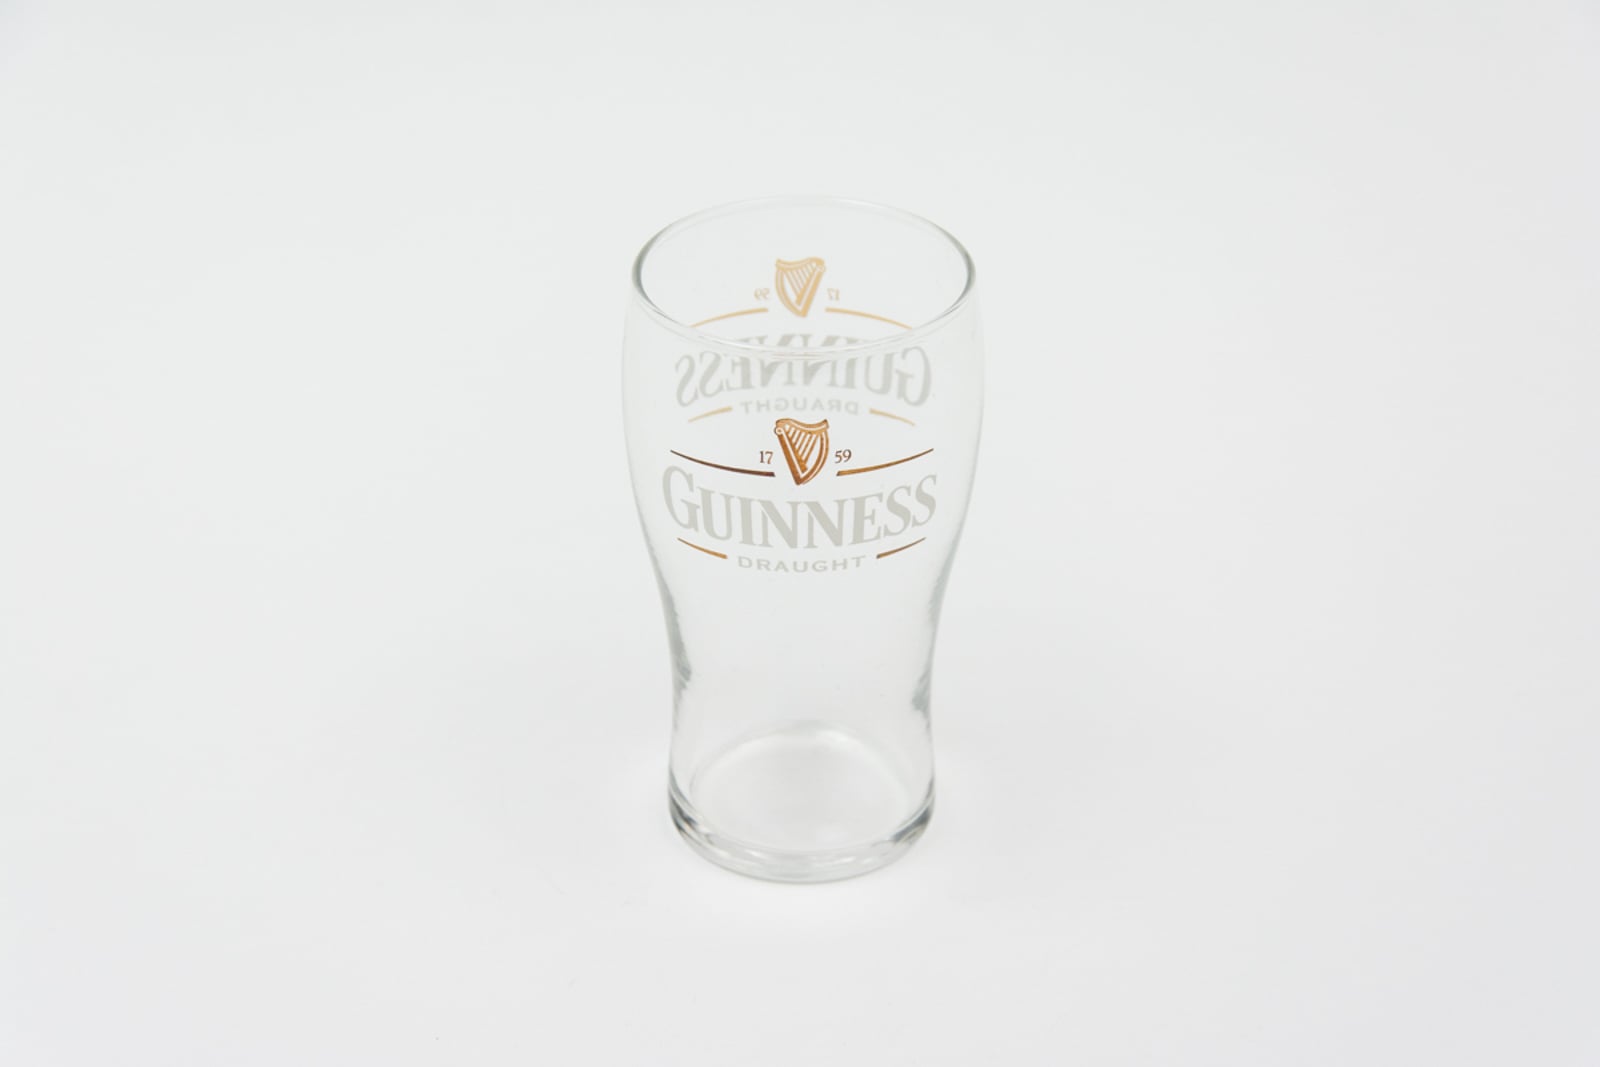 Guinness Draught 1/2 Imperial Pint Glassware